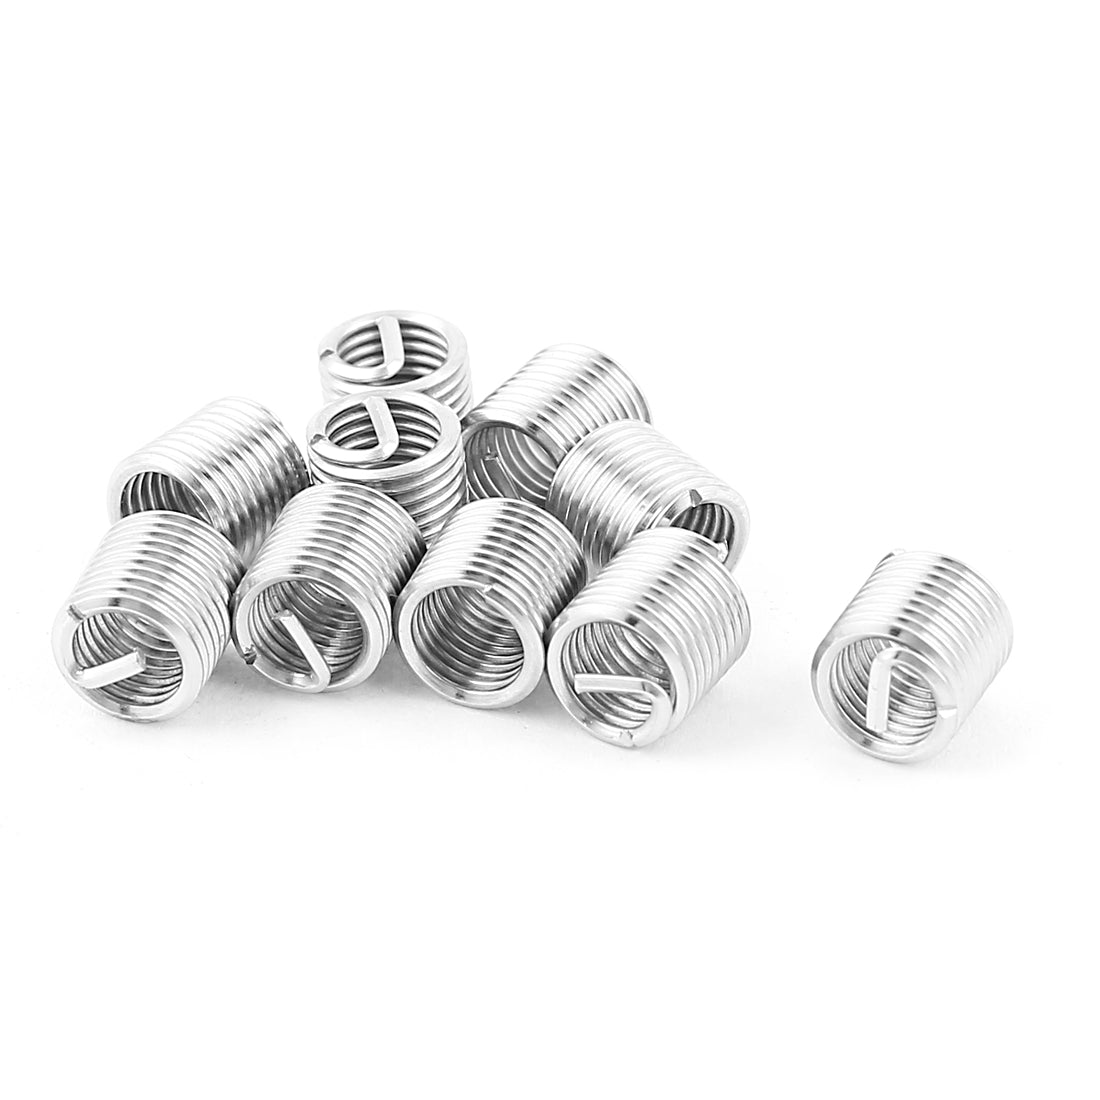 uxcell Uxcell 10Pcs 304 Stainless Steel Helicoil Wire Thread Repair Inserts M5 x 0.8mm x 2D